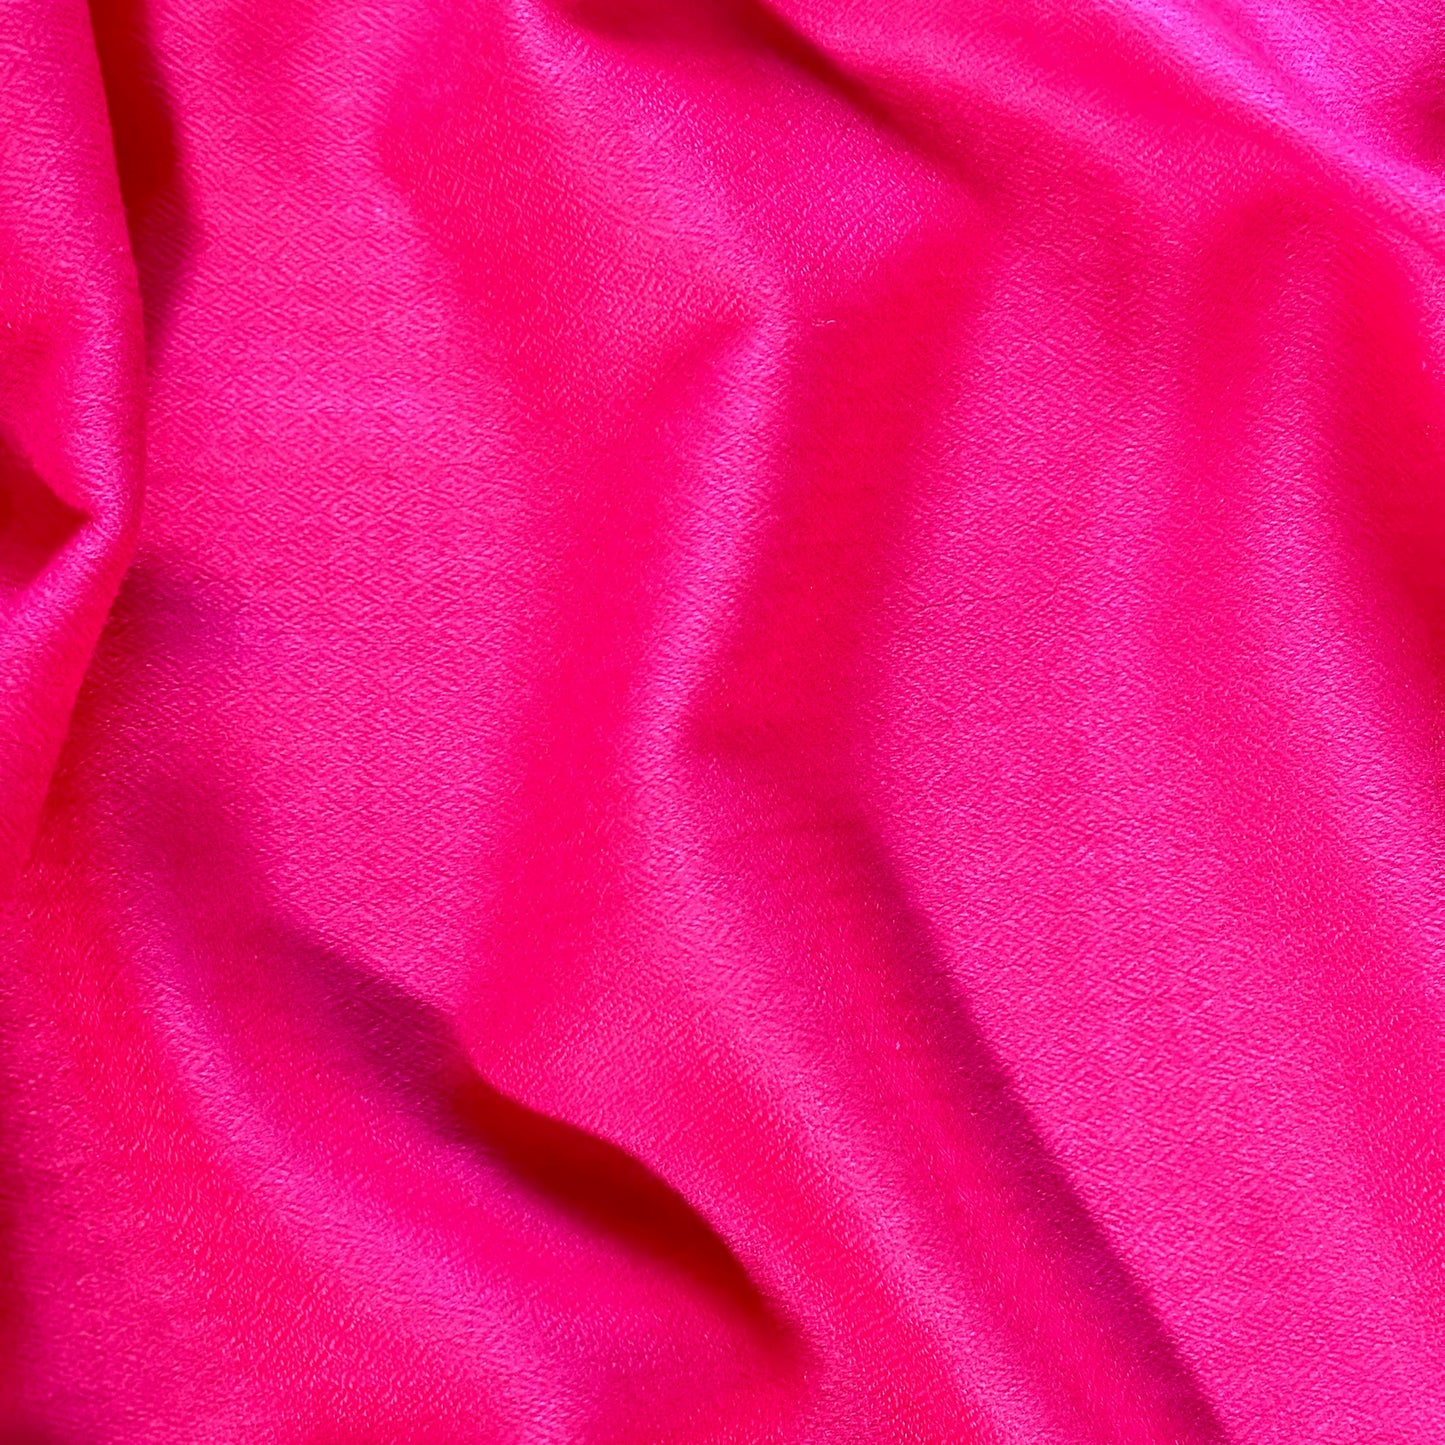 Soft Cashmere Scarf in Hot Pink Color